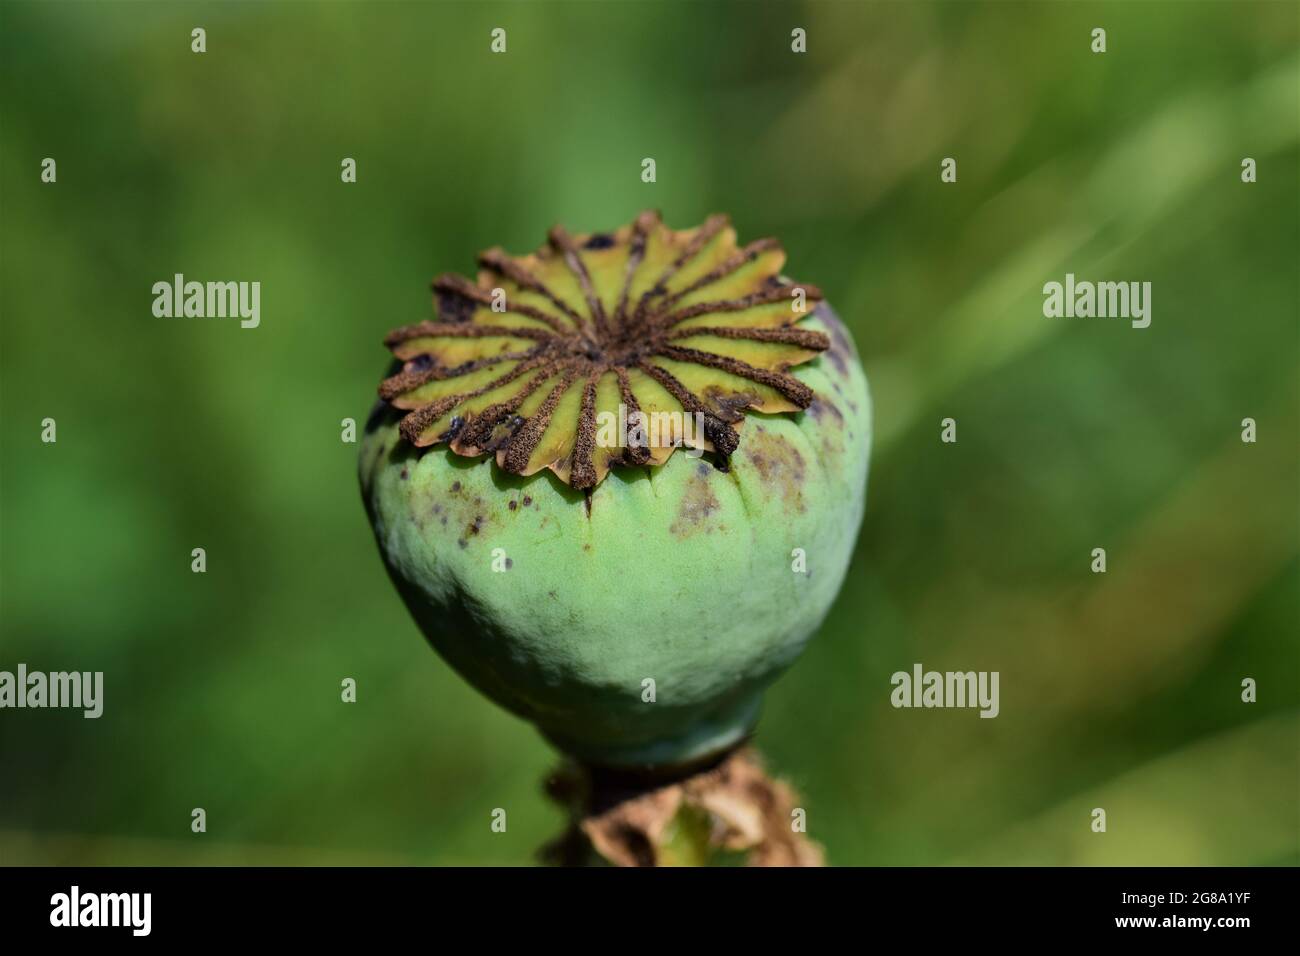 A green poppy seed capsule against a green blurred background Stock Photo